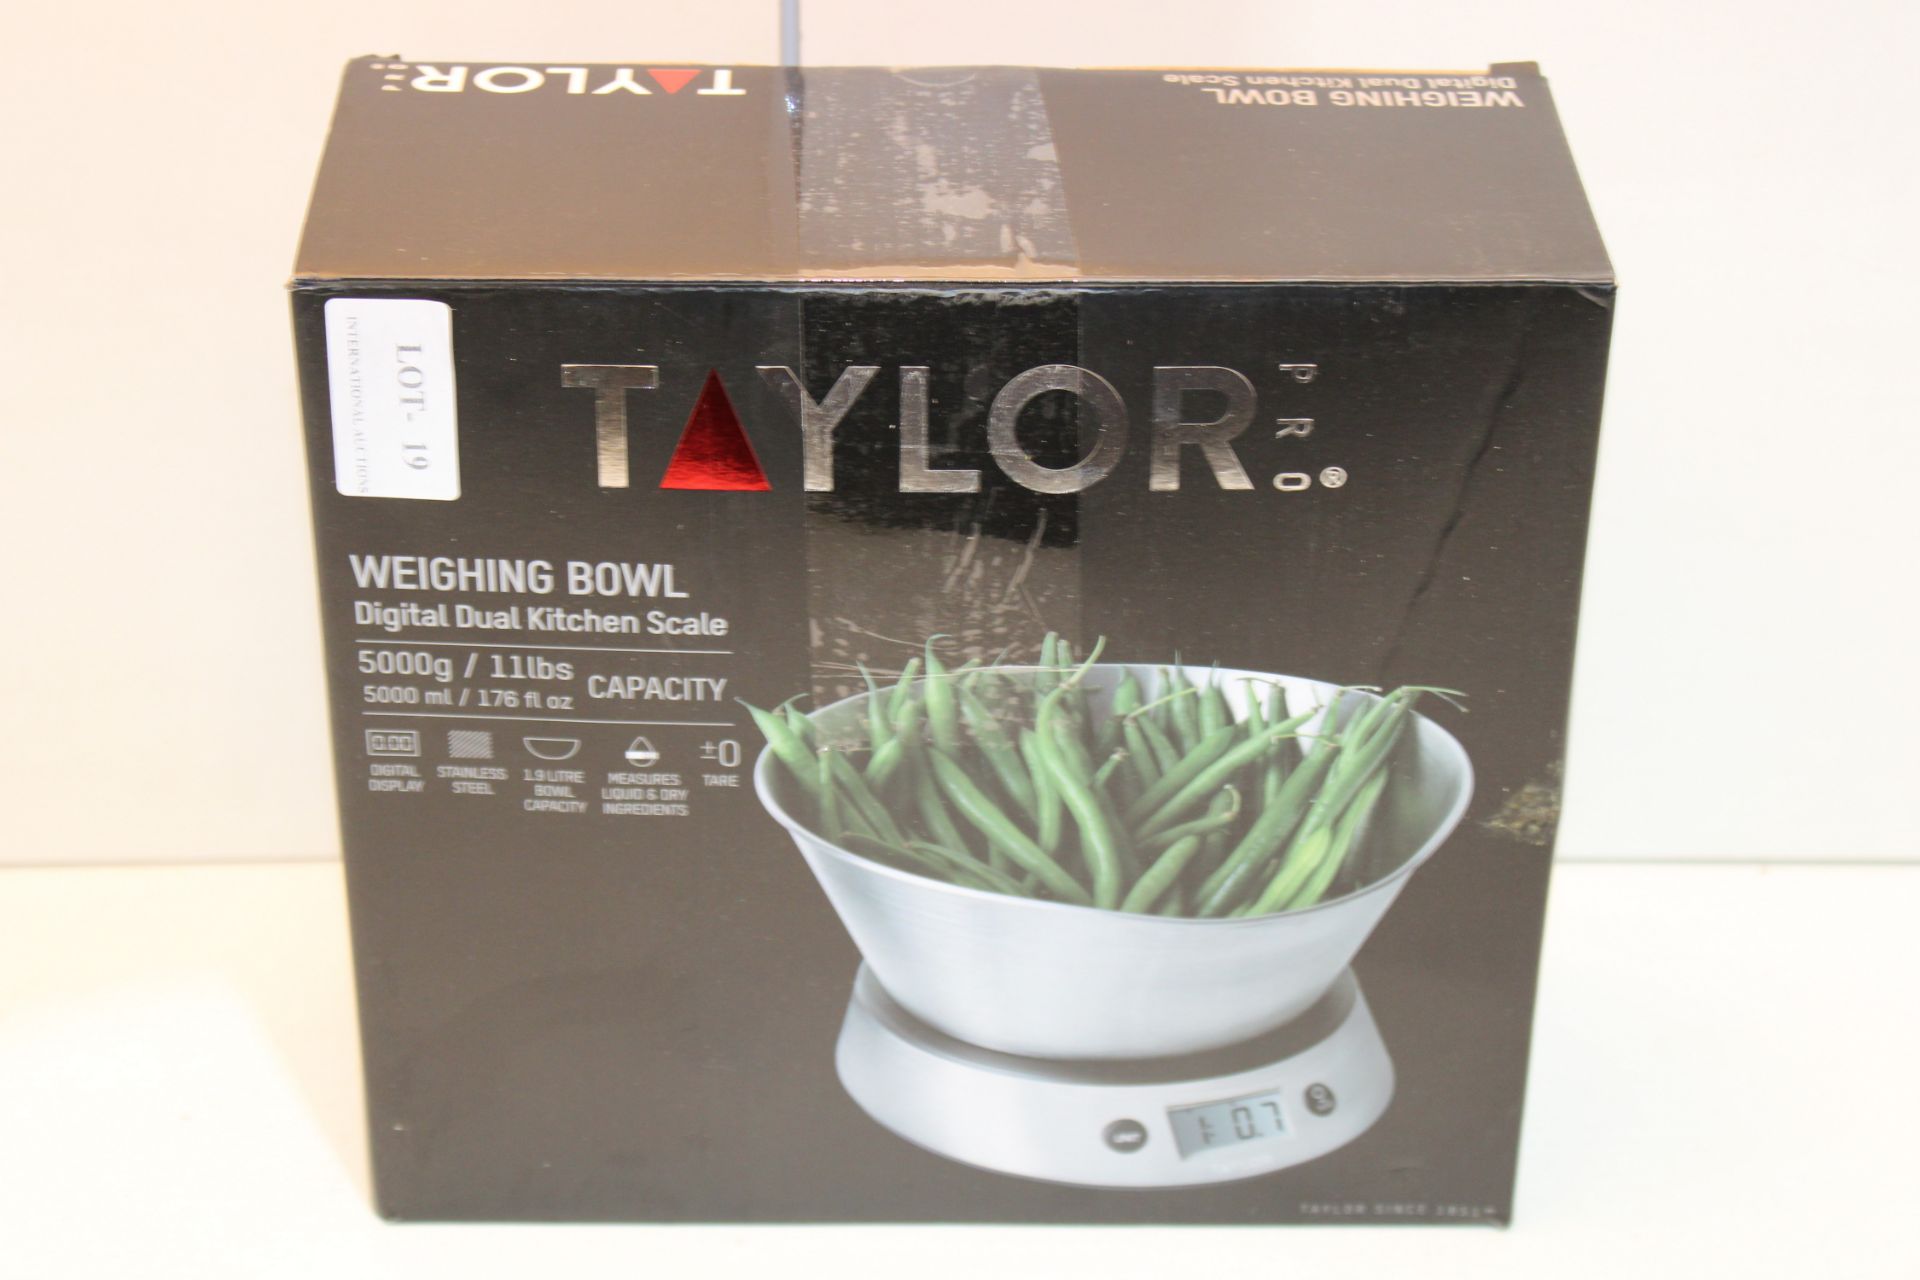 BOXED TAYLORS WEIGHING BOWL DIGITAL DUAL KITCHEN SCALE Condition ReportAppraisal Available on